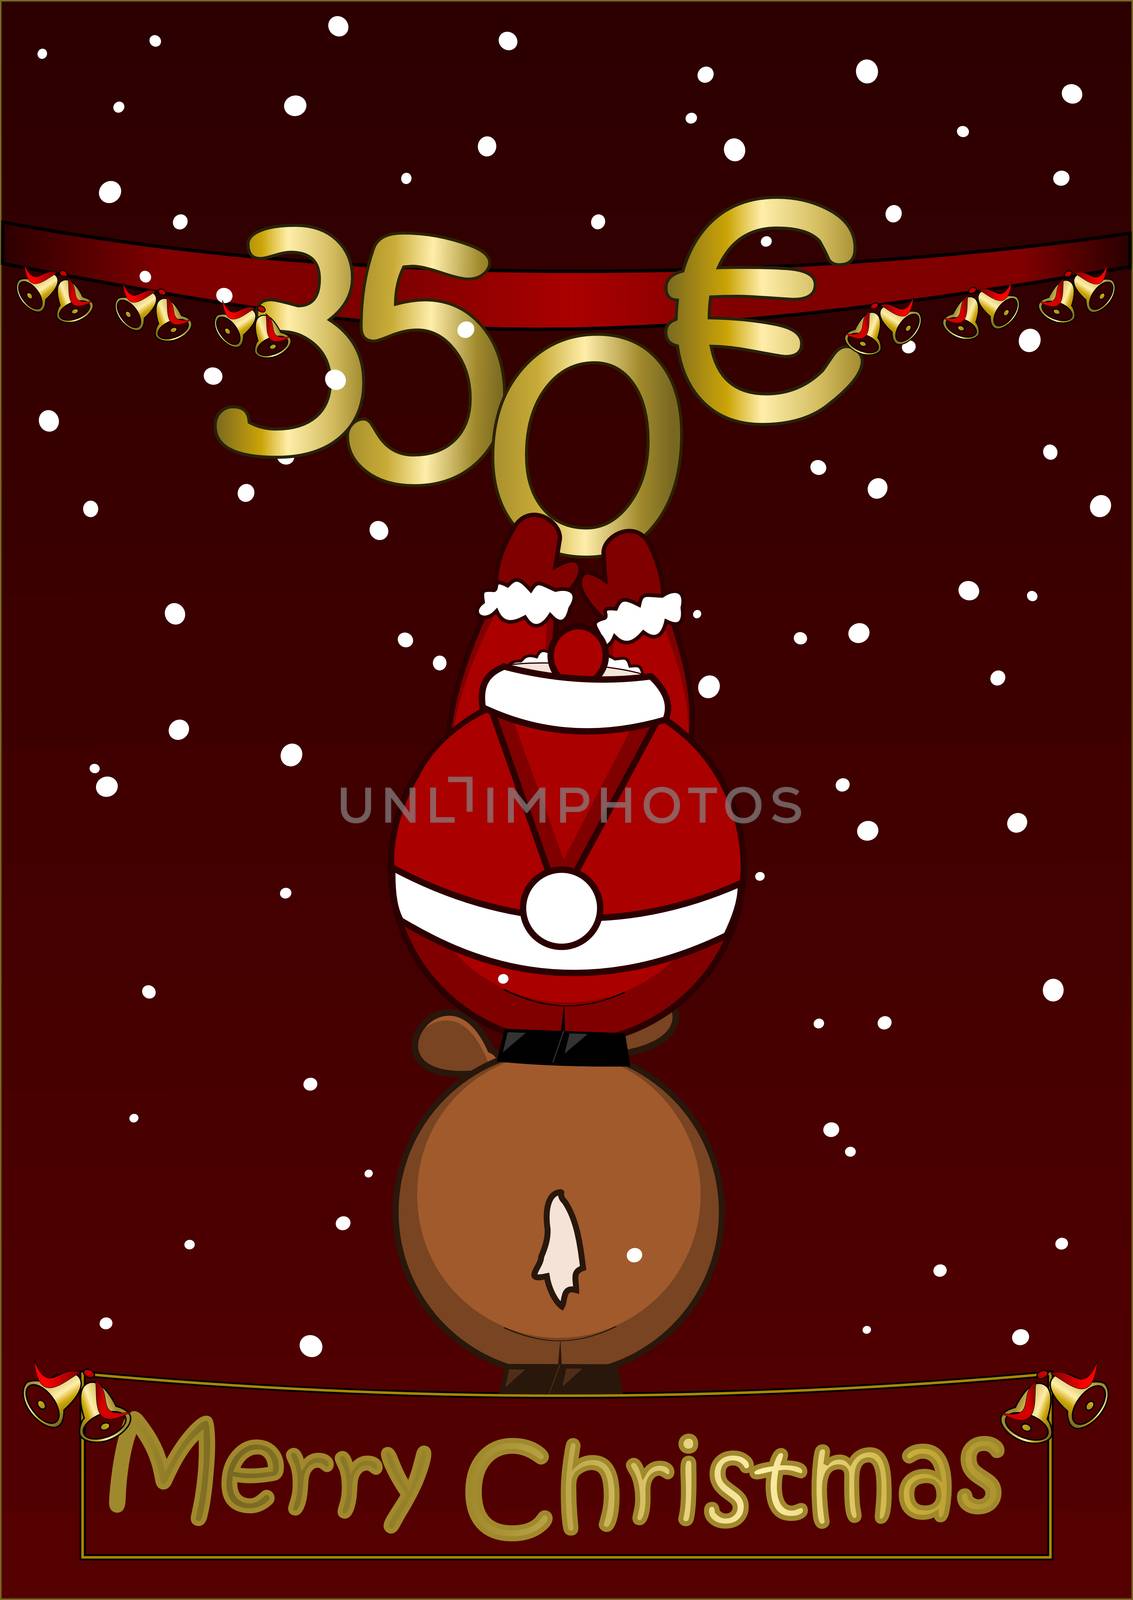 Merry Christmas - 350 - gift certificate